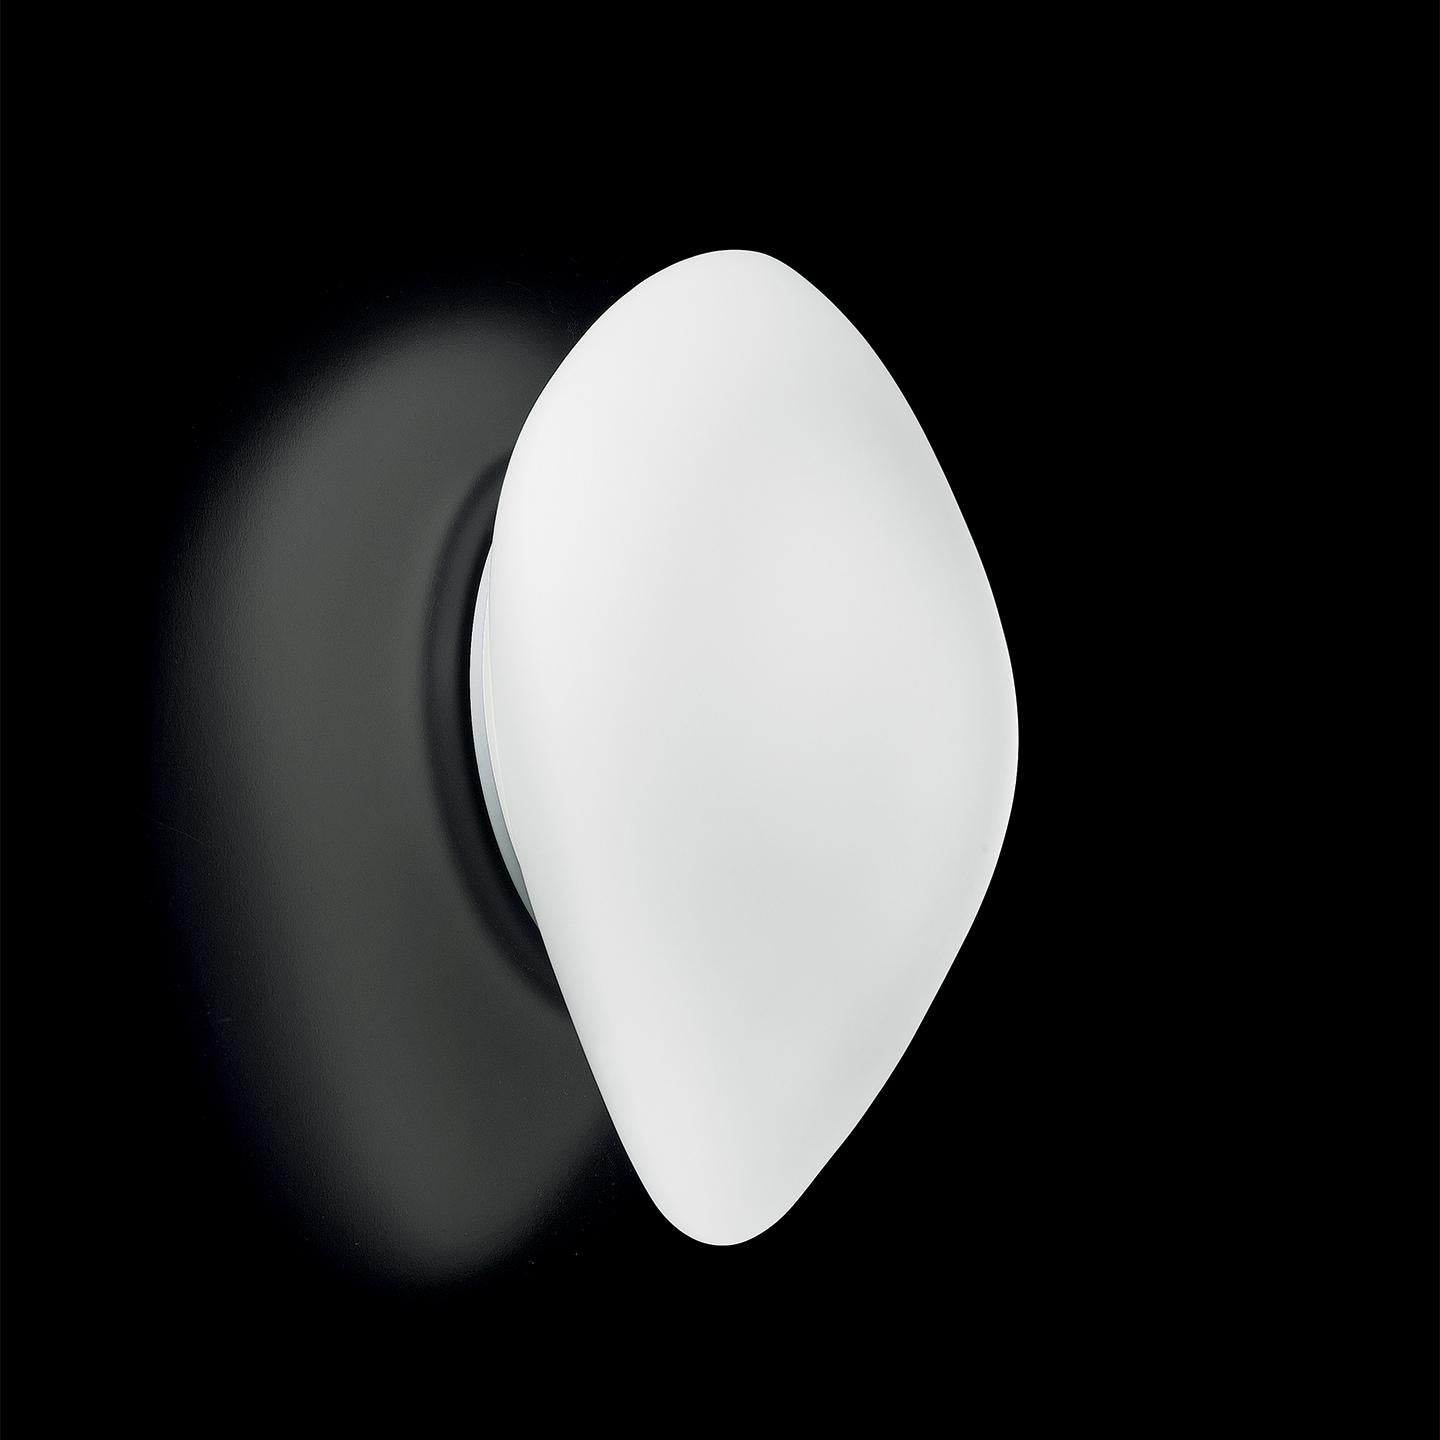 Stone was designed in 2006 by Leucos design lab to provide a hand blown glass wall or ceiling lamp that captures the beautiful and unique shape of a smooth stone. This form lets Stone be used as a standalone light or in sets that create an